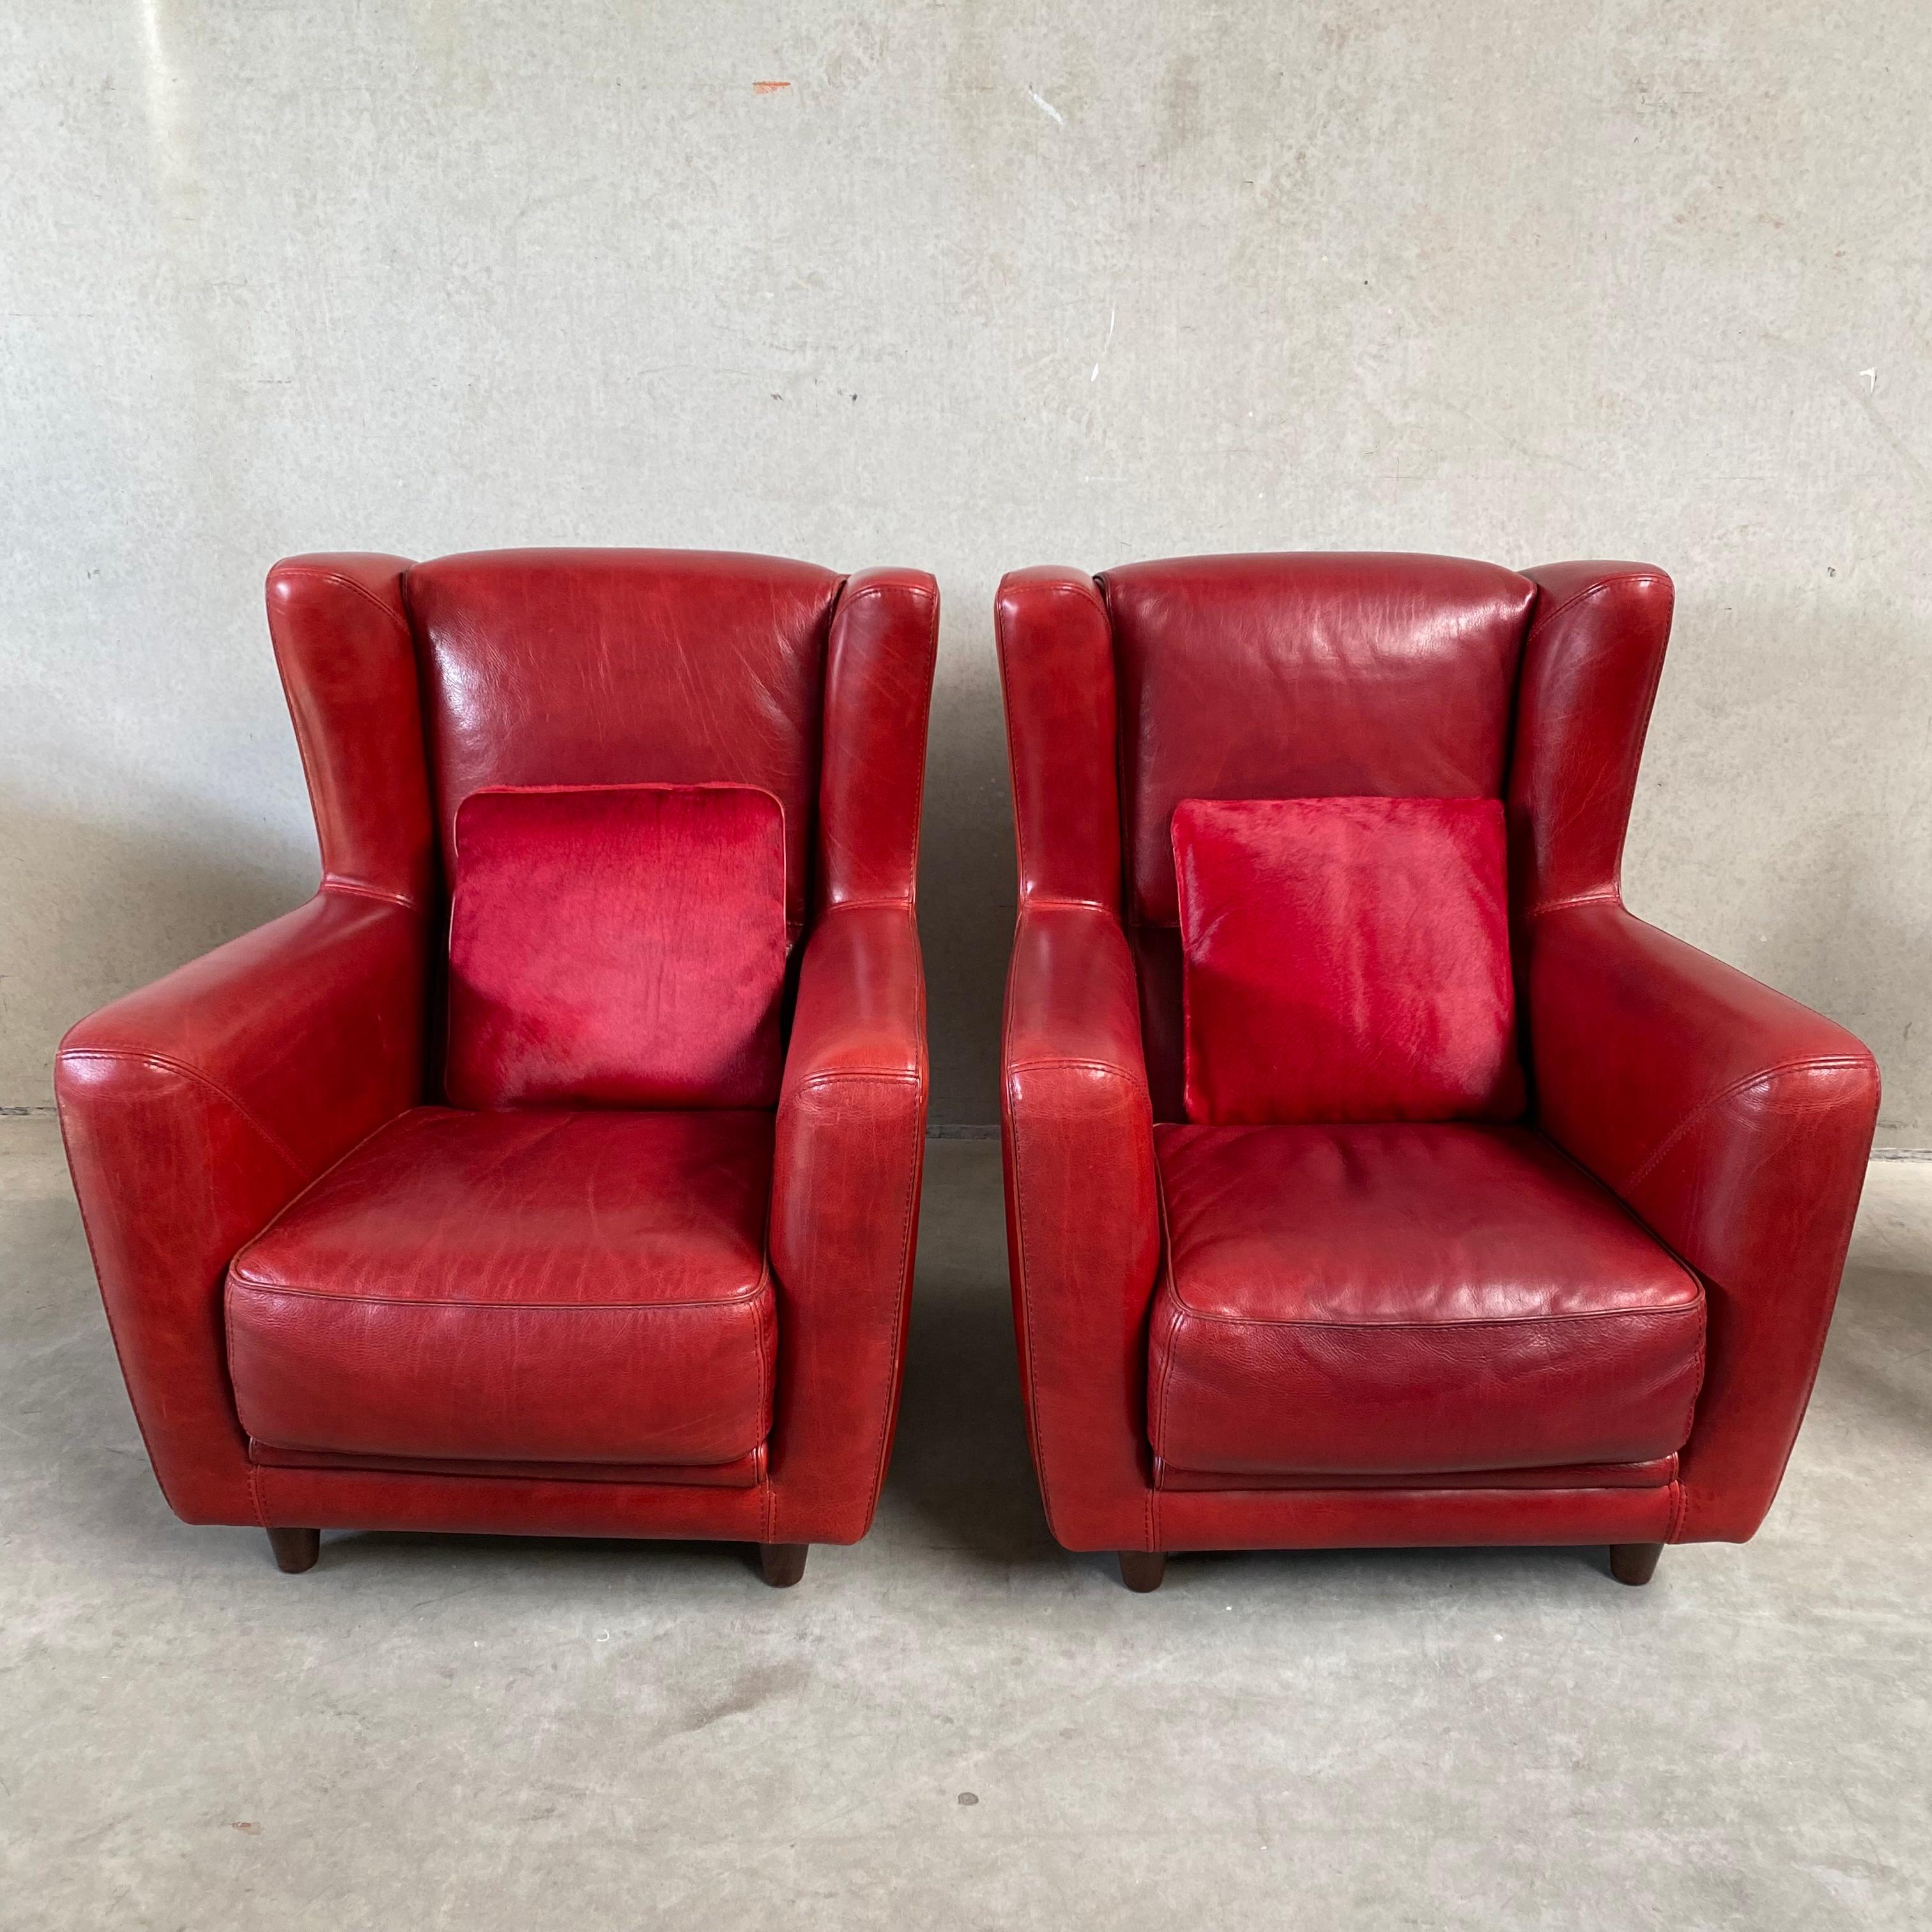 Pair of Ox-Blood Red Leather Lounge Chairs Begére by Baxter Italy 90s For Sale 10